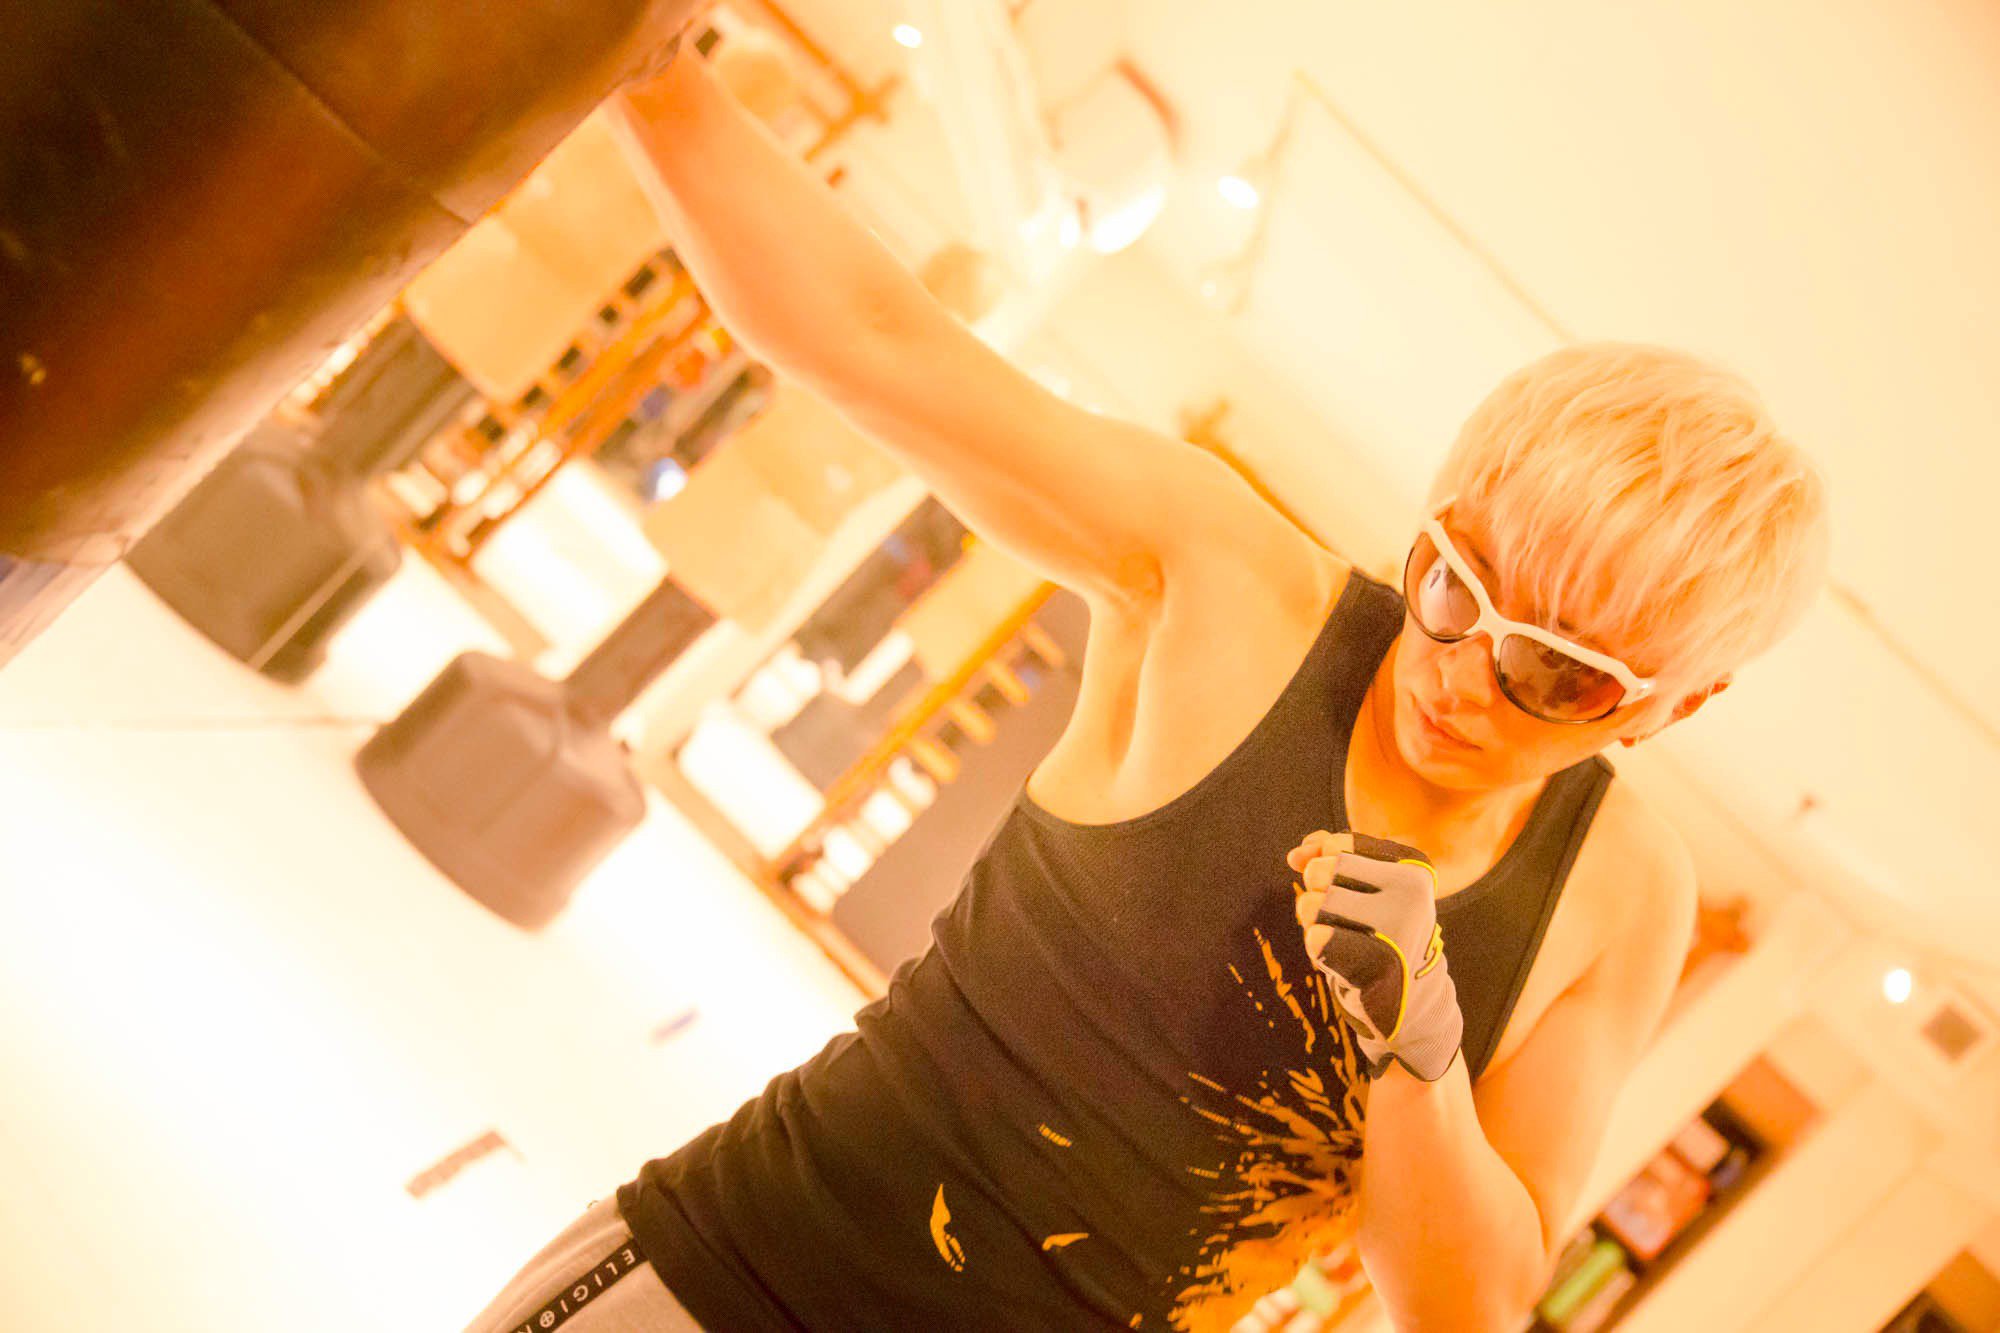 Gackt boxing with glasses